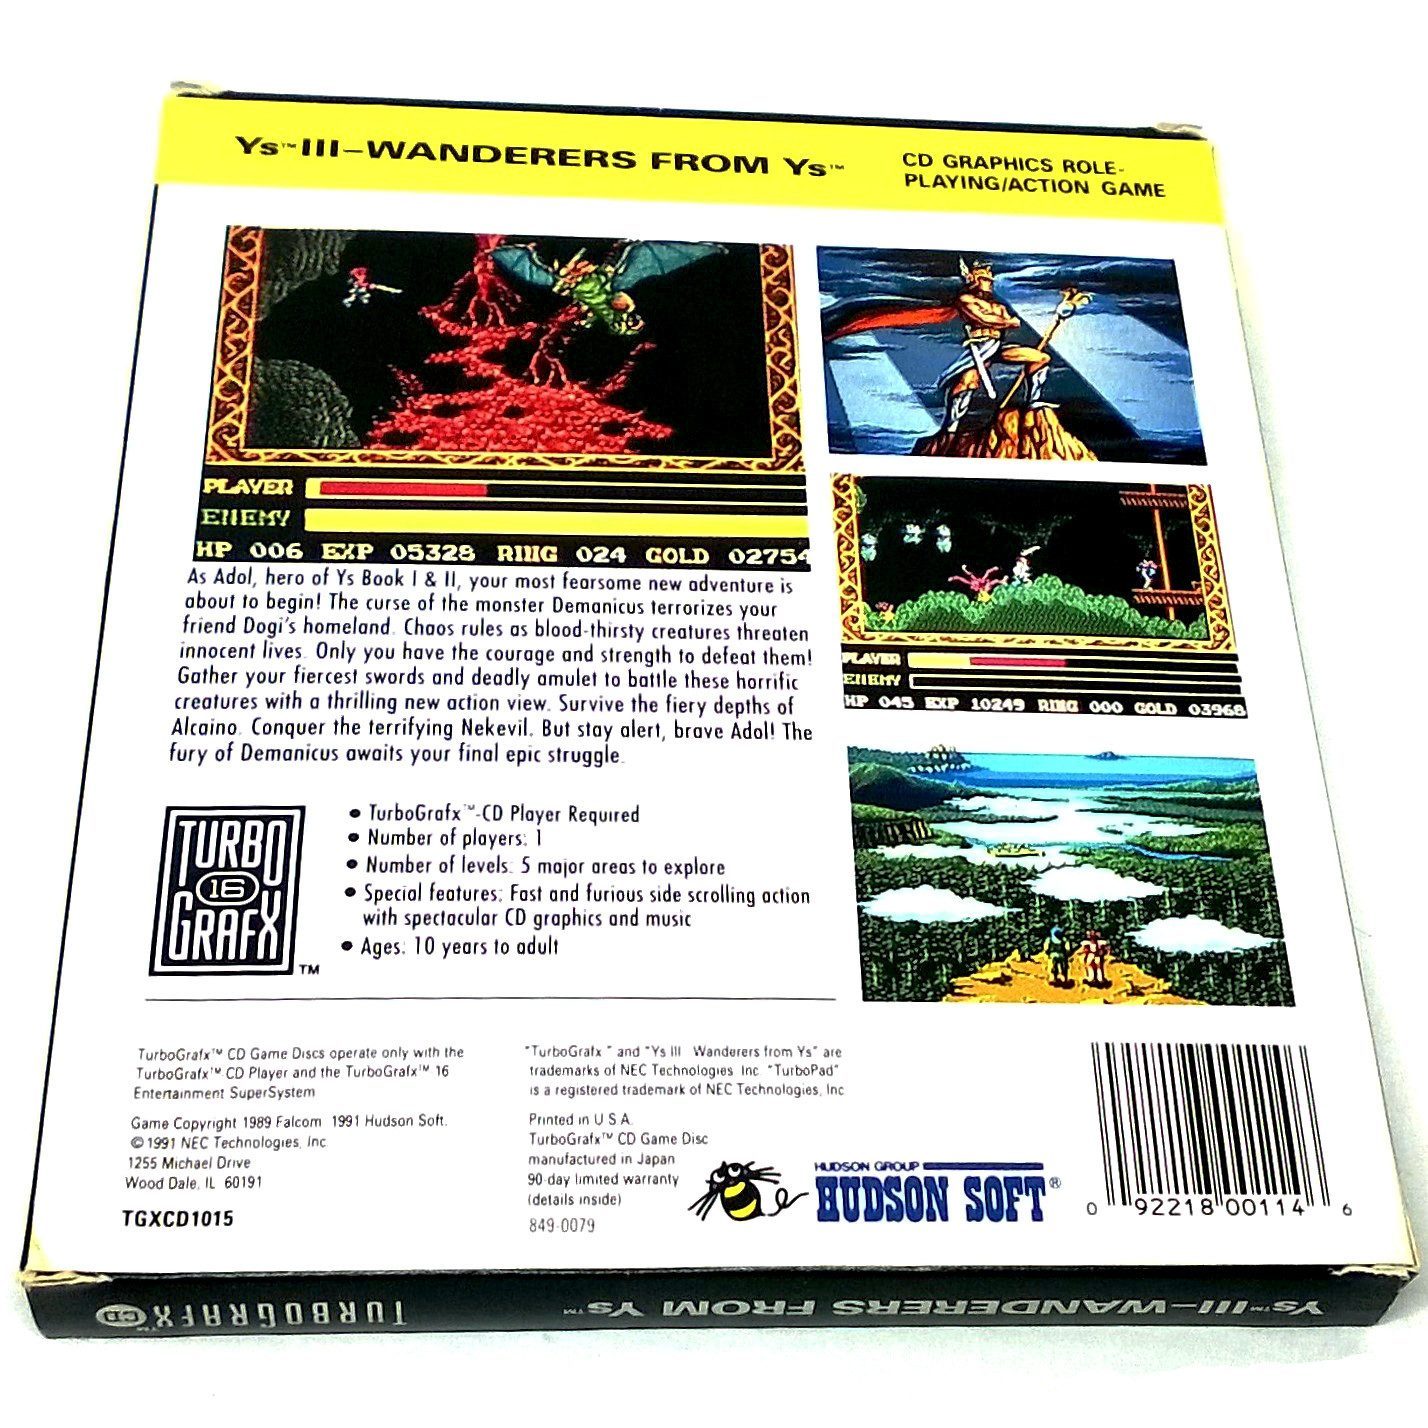 Ys III: Wanderers from Ys for TurboGrafx-16 CD - Back of box